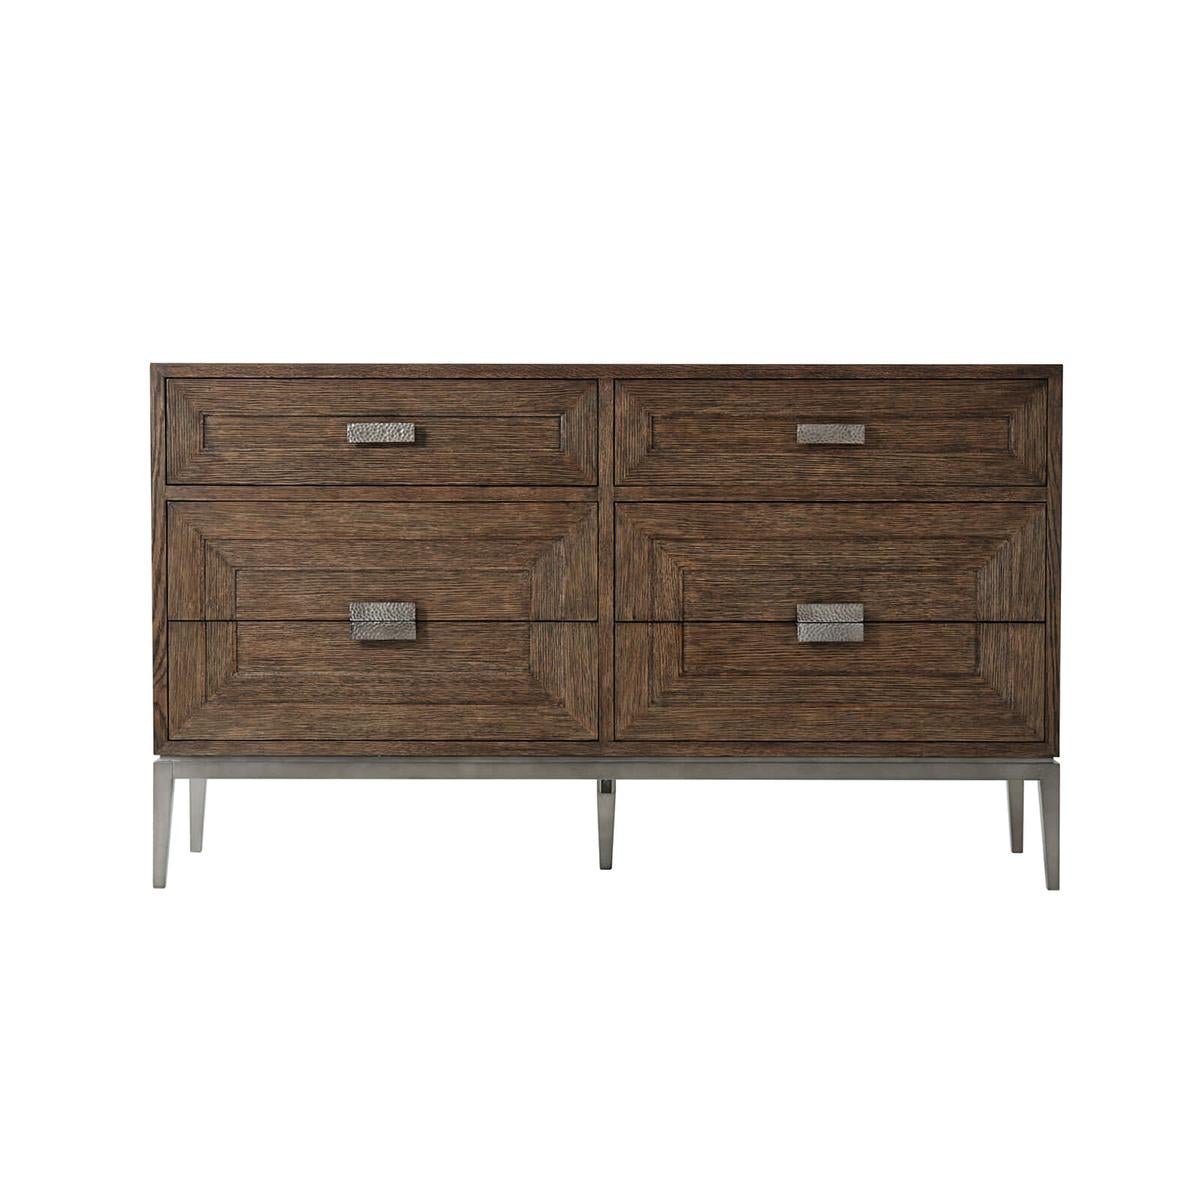 Modern dark oak dresser, a six-drawer chest of drawers in our dark brushed oak charteris finish with two frieze drawers above and four larger drawers below. Each with relief inlaid angular centric lines and hammered metal handles with matte tungsten